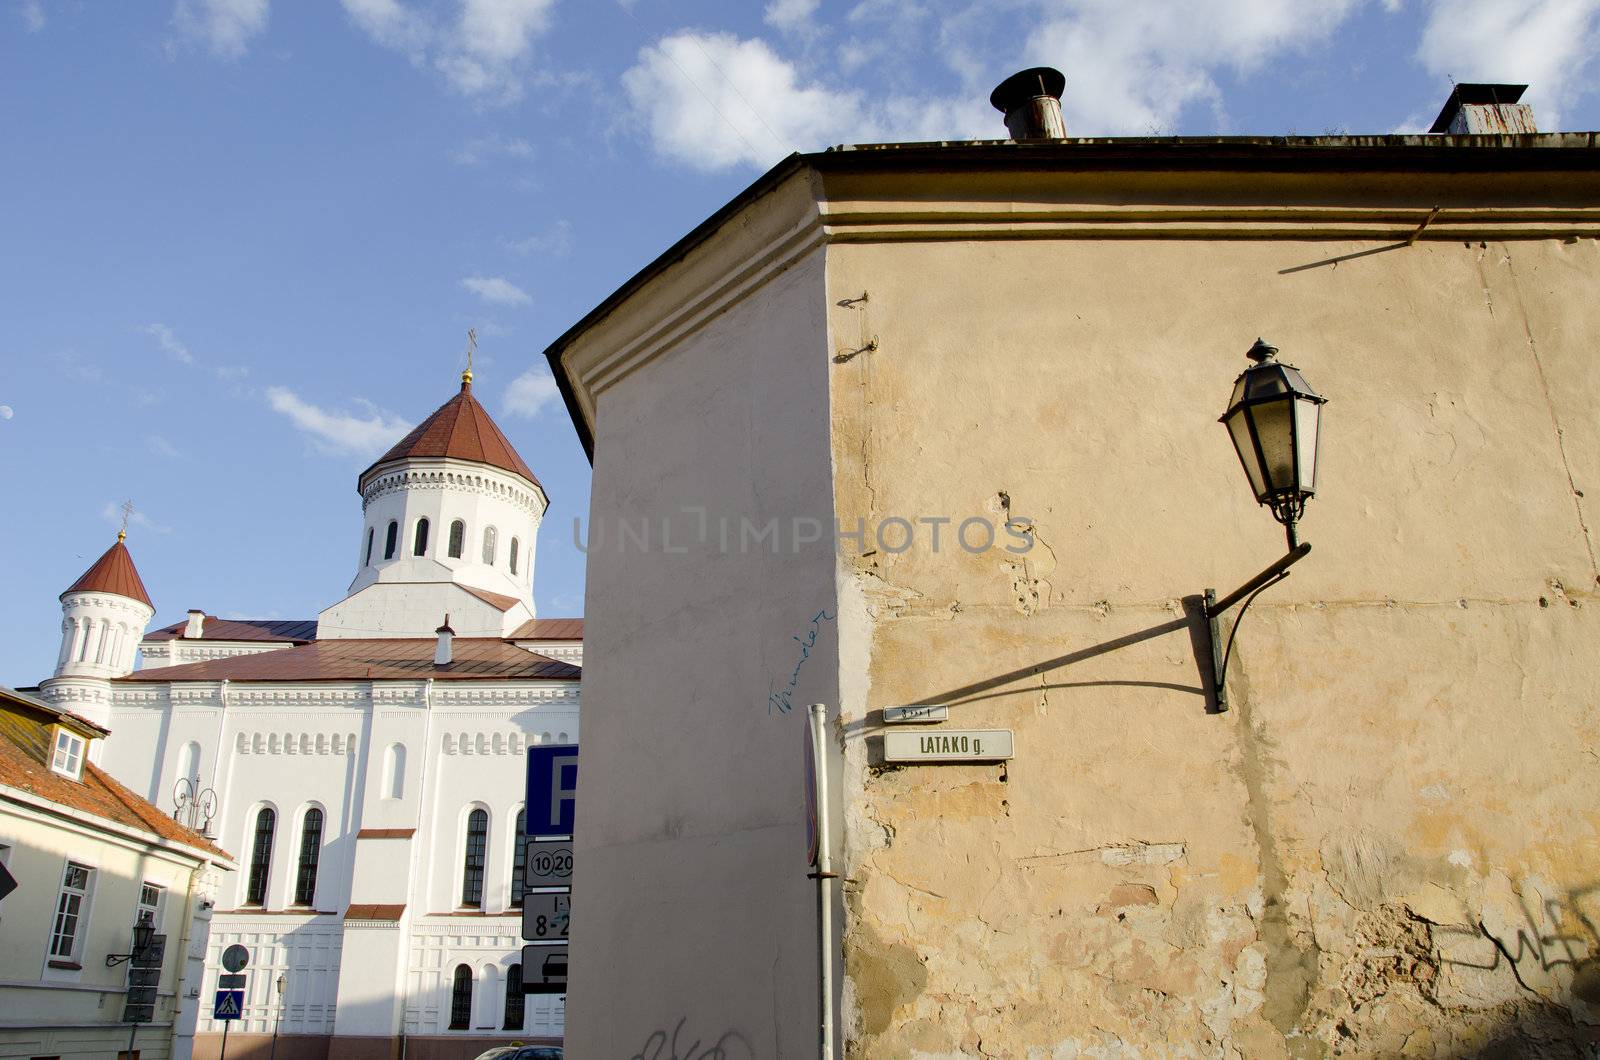 Vilnius old town houses heritage protected by UNESCO.